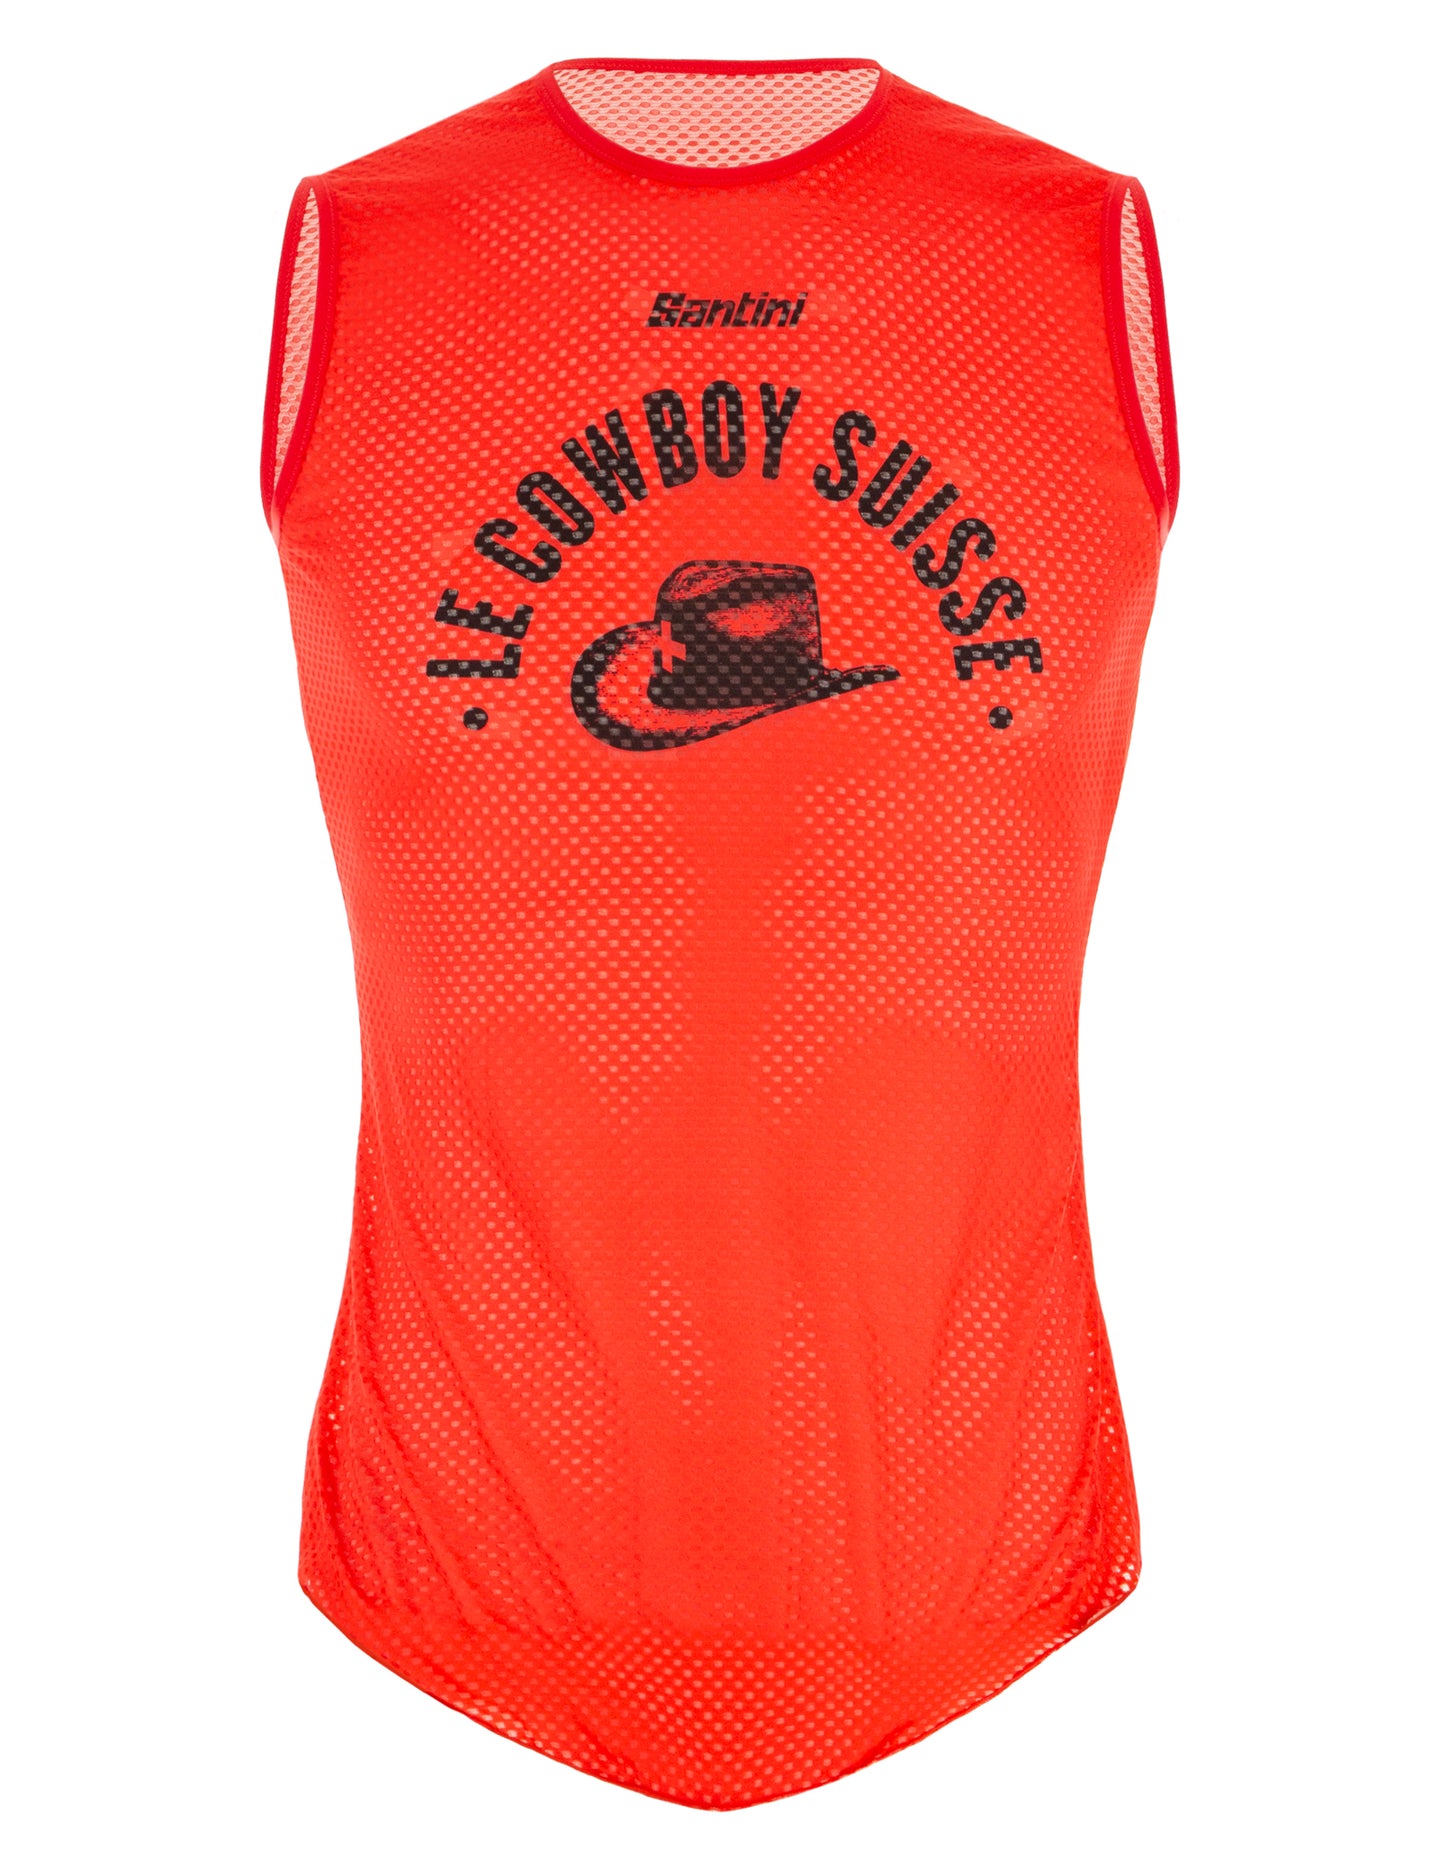 Cowboy Base Layer - UCI Collection by Santini | Cento Cycling